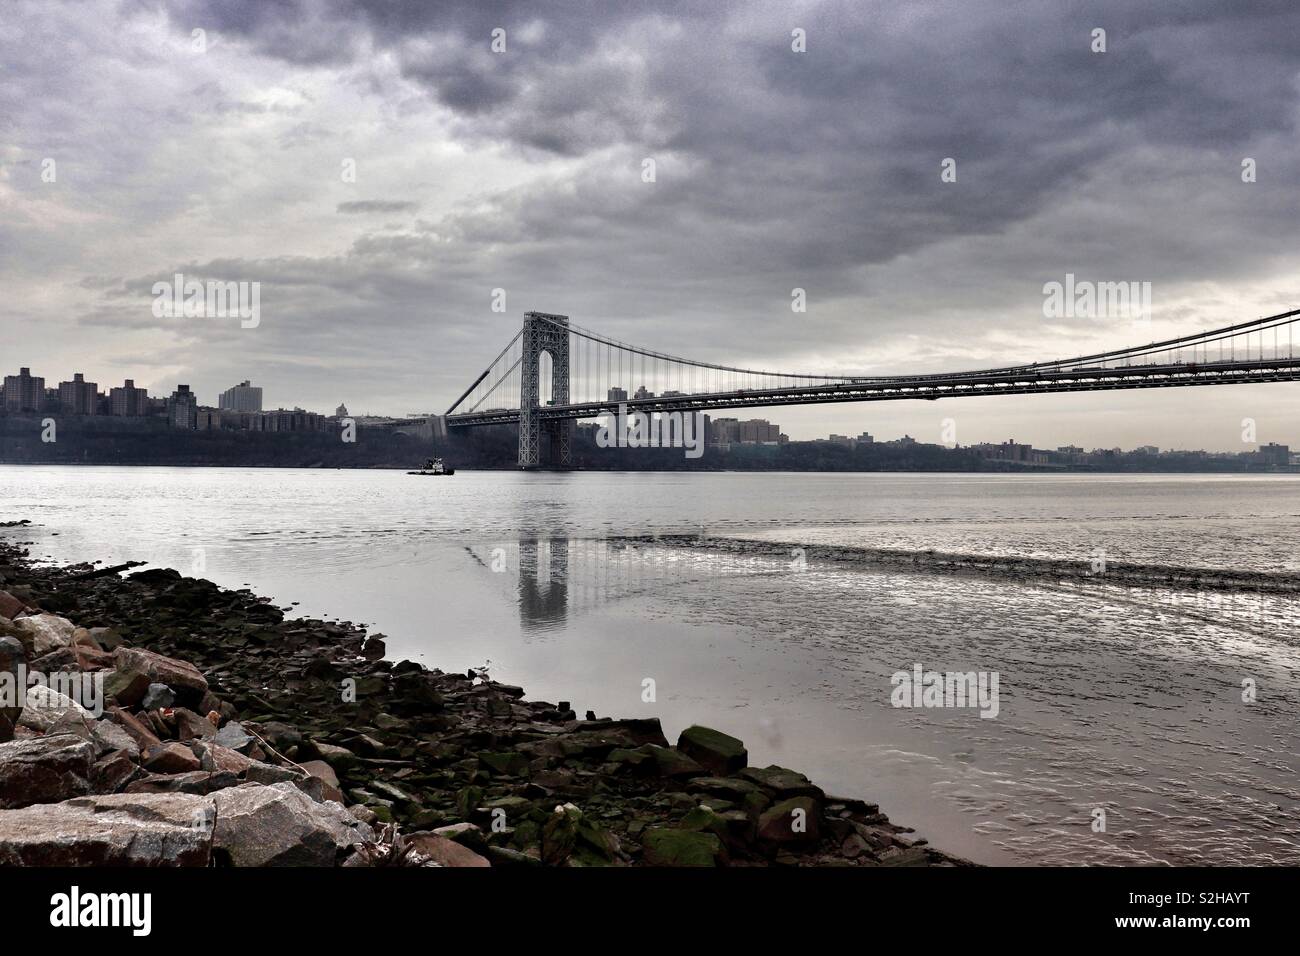 George Washington Bridge casting a reflection on an overcast day with small boat passing underneath Stock Photo